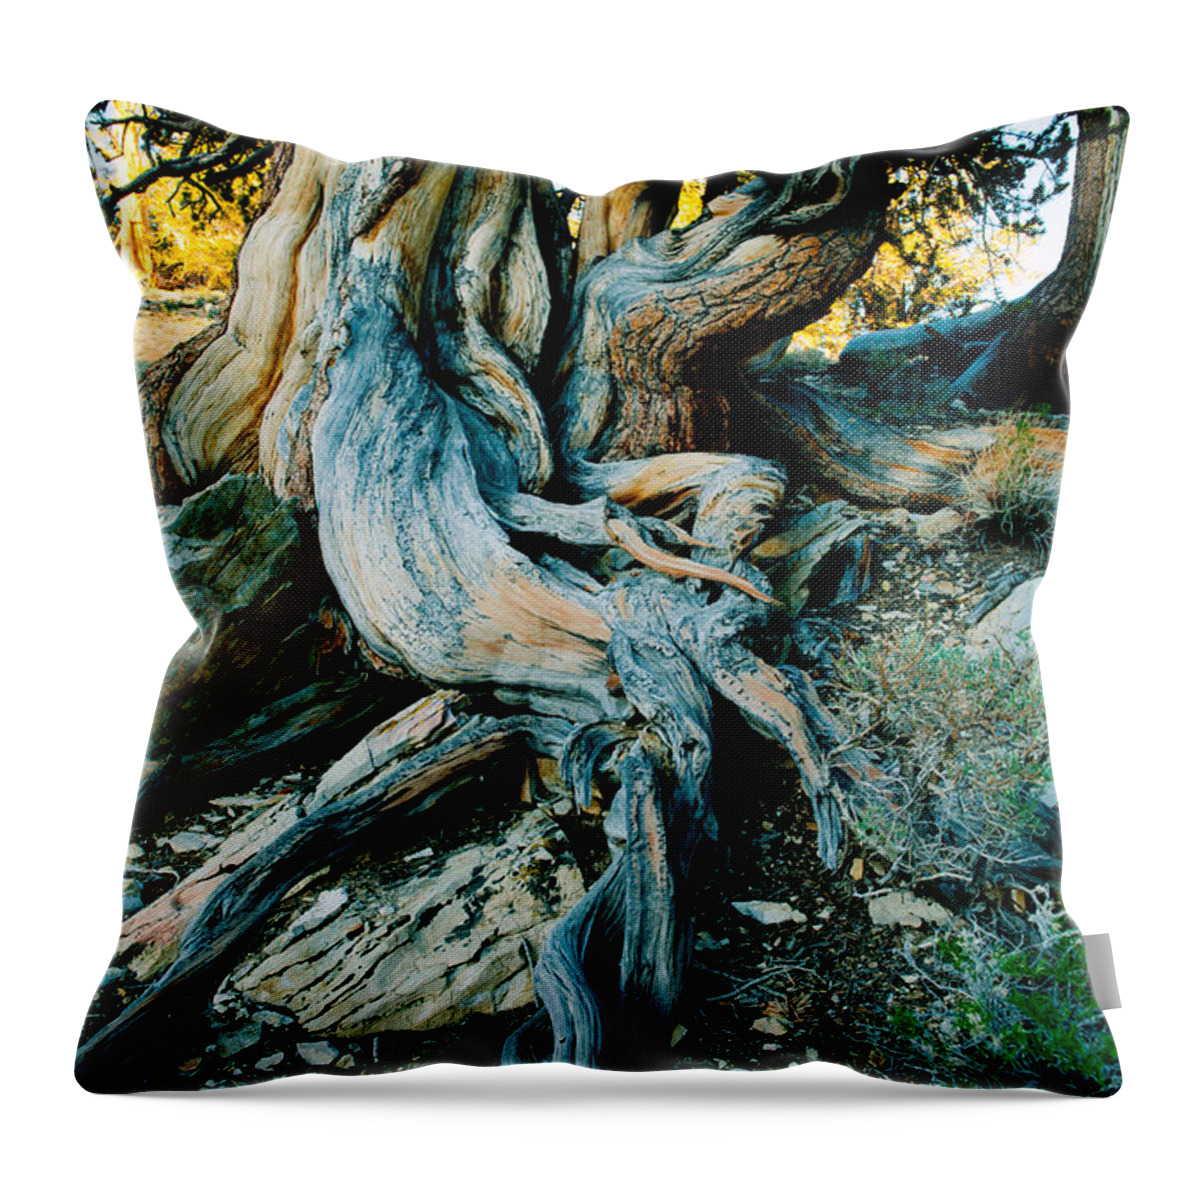 Photography Throw Pillow featuring the photograph Bristlecone Pine Grove At Ancient by Panoramic Images